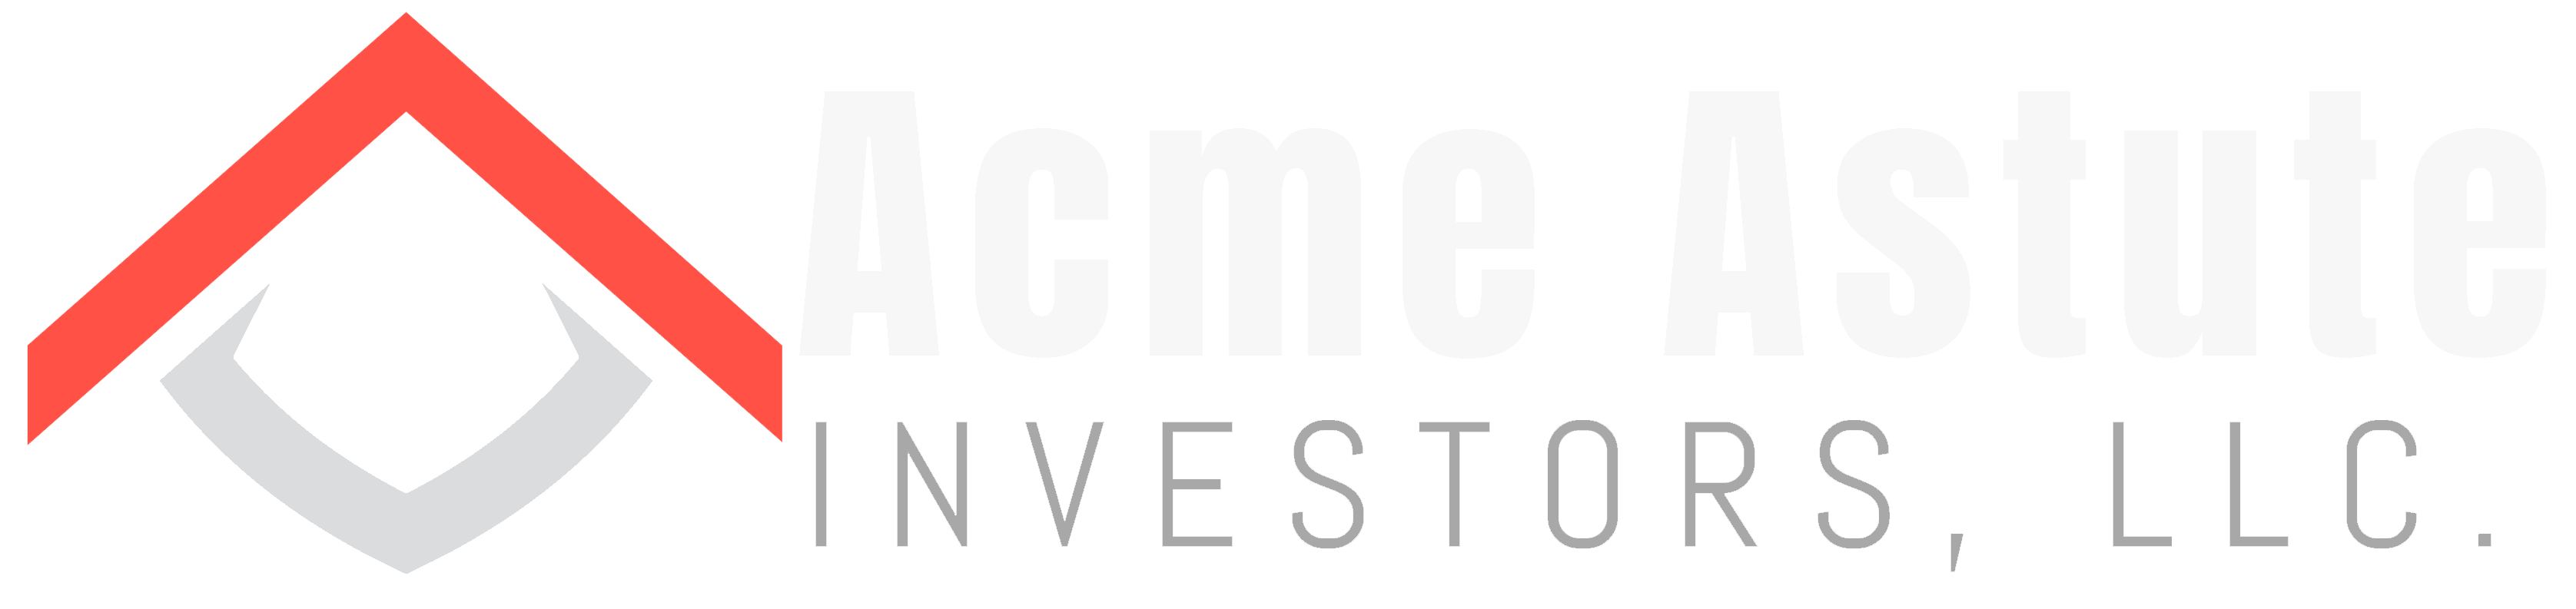 Acme Astute Investors LLCHow To Optimize Your Blog For High Ranking.